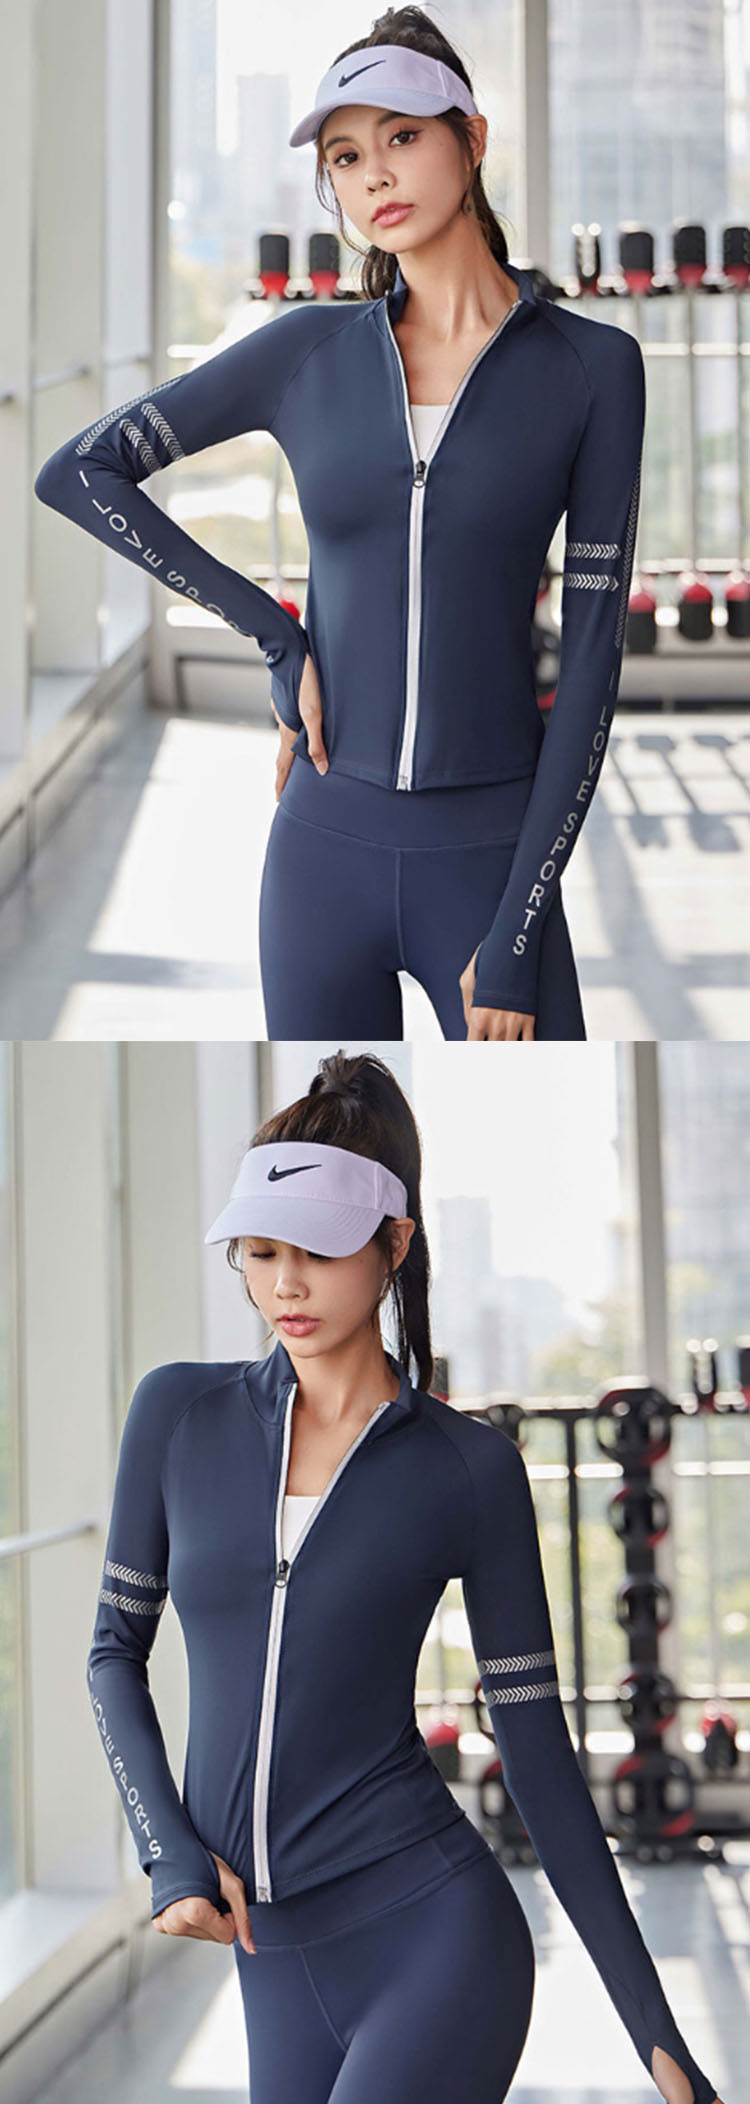 Zipper design is adopted to keep the body temperature better during exercise